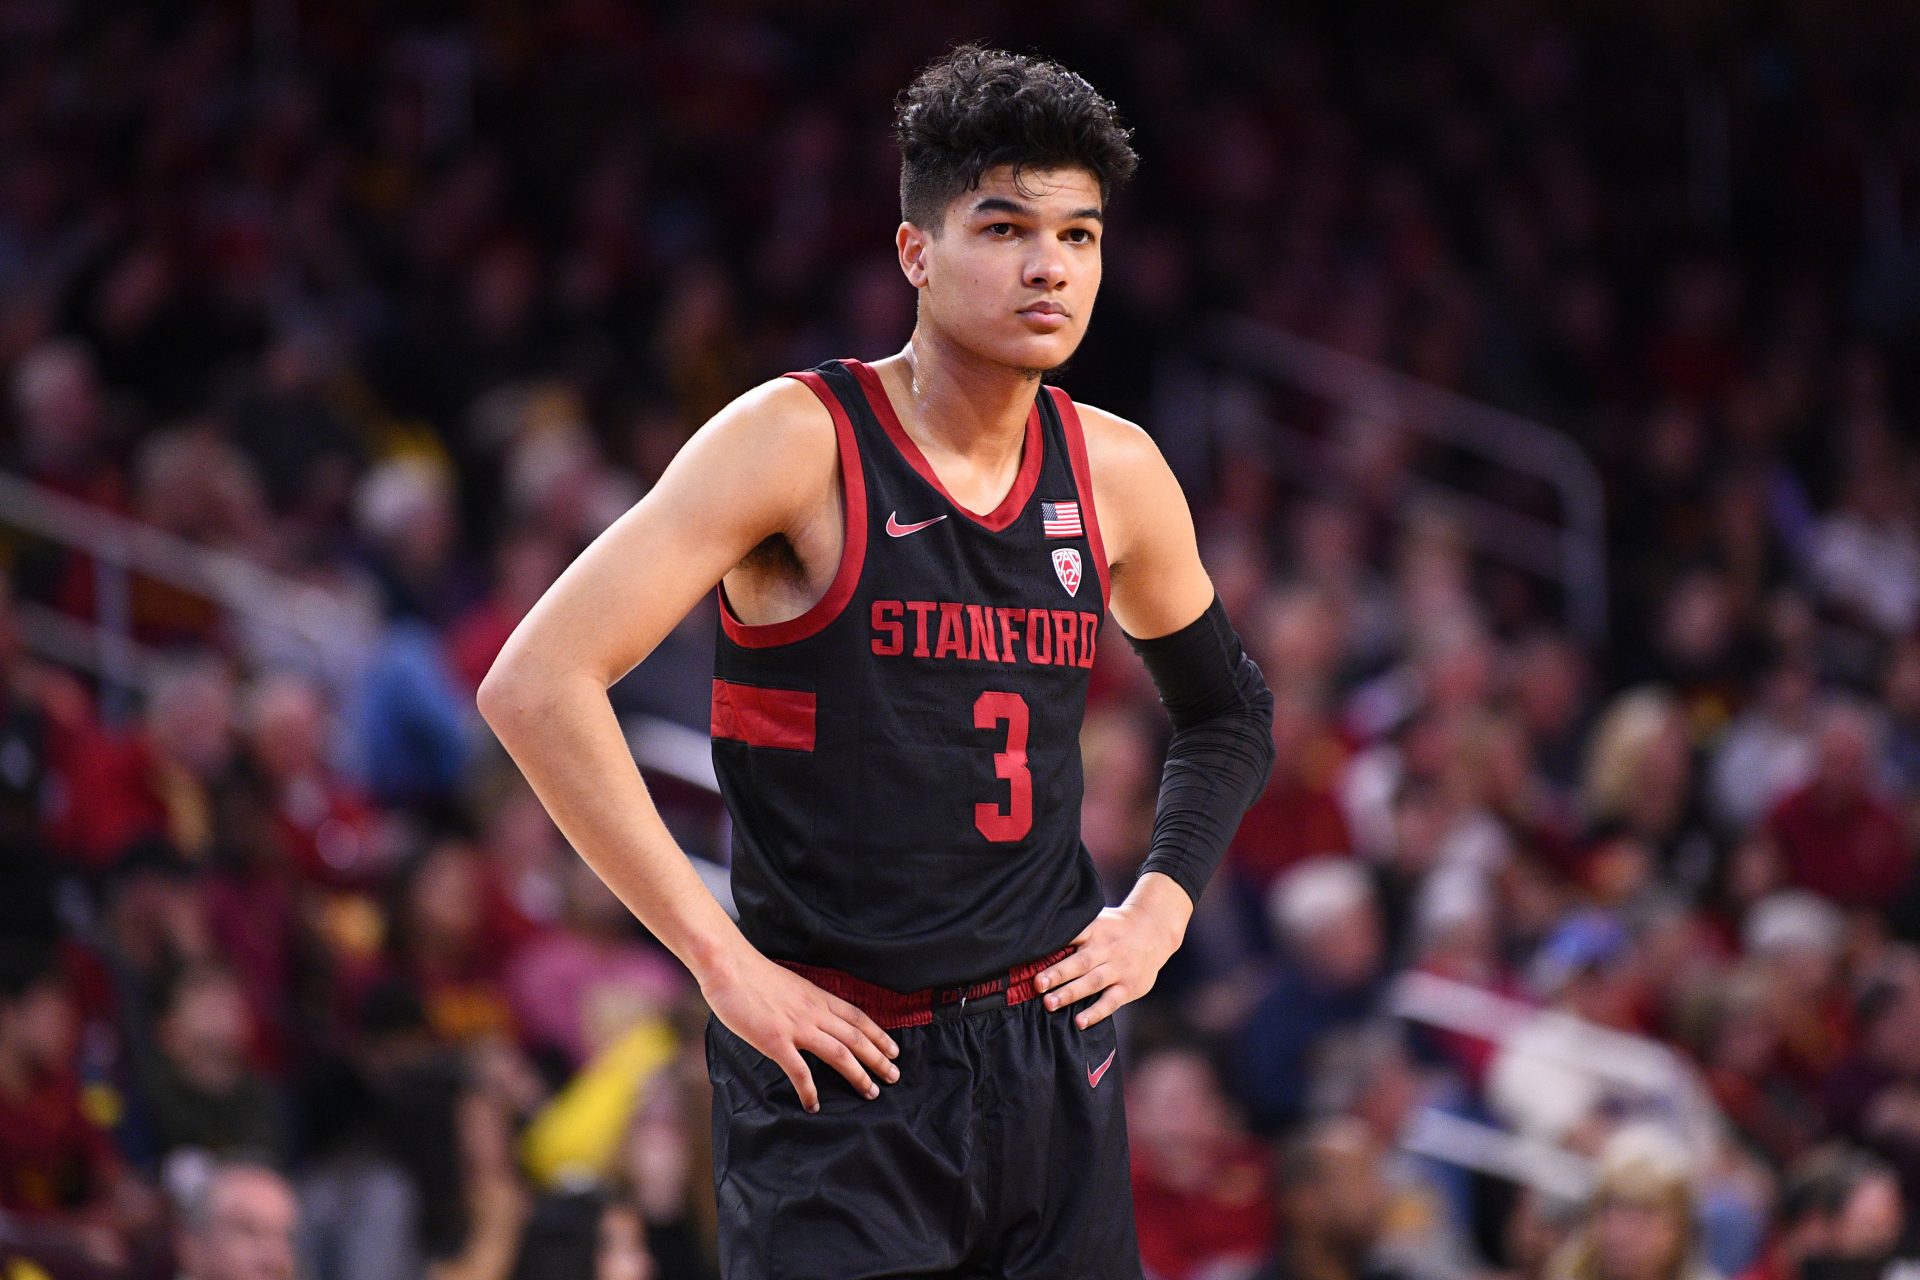 NBA's Tyrell Terry and other young athletes who have struggled with anxiety